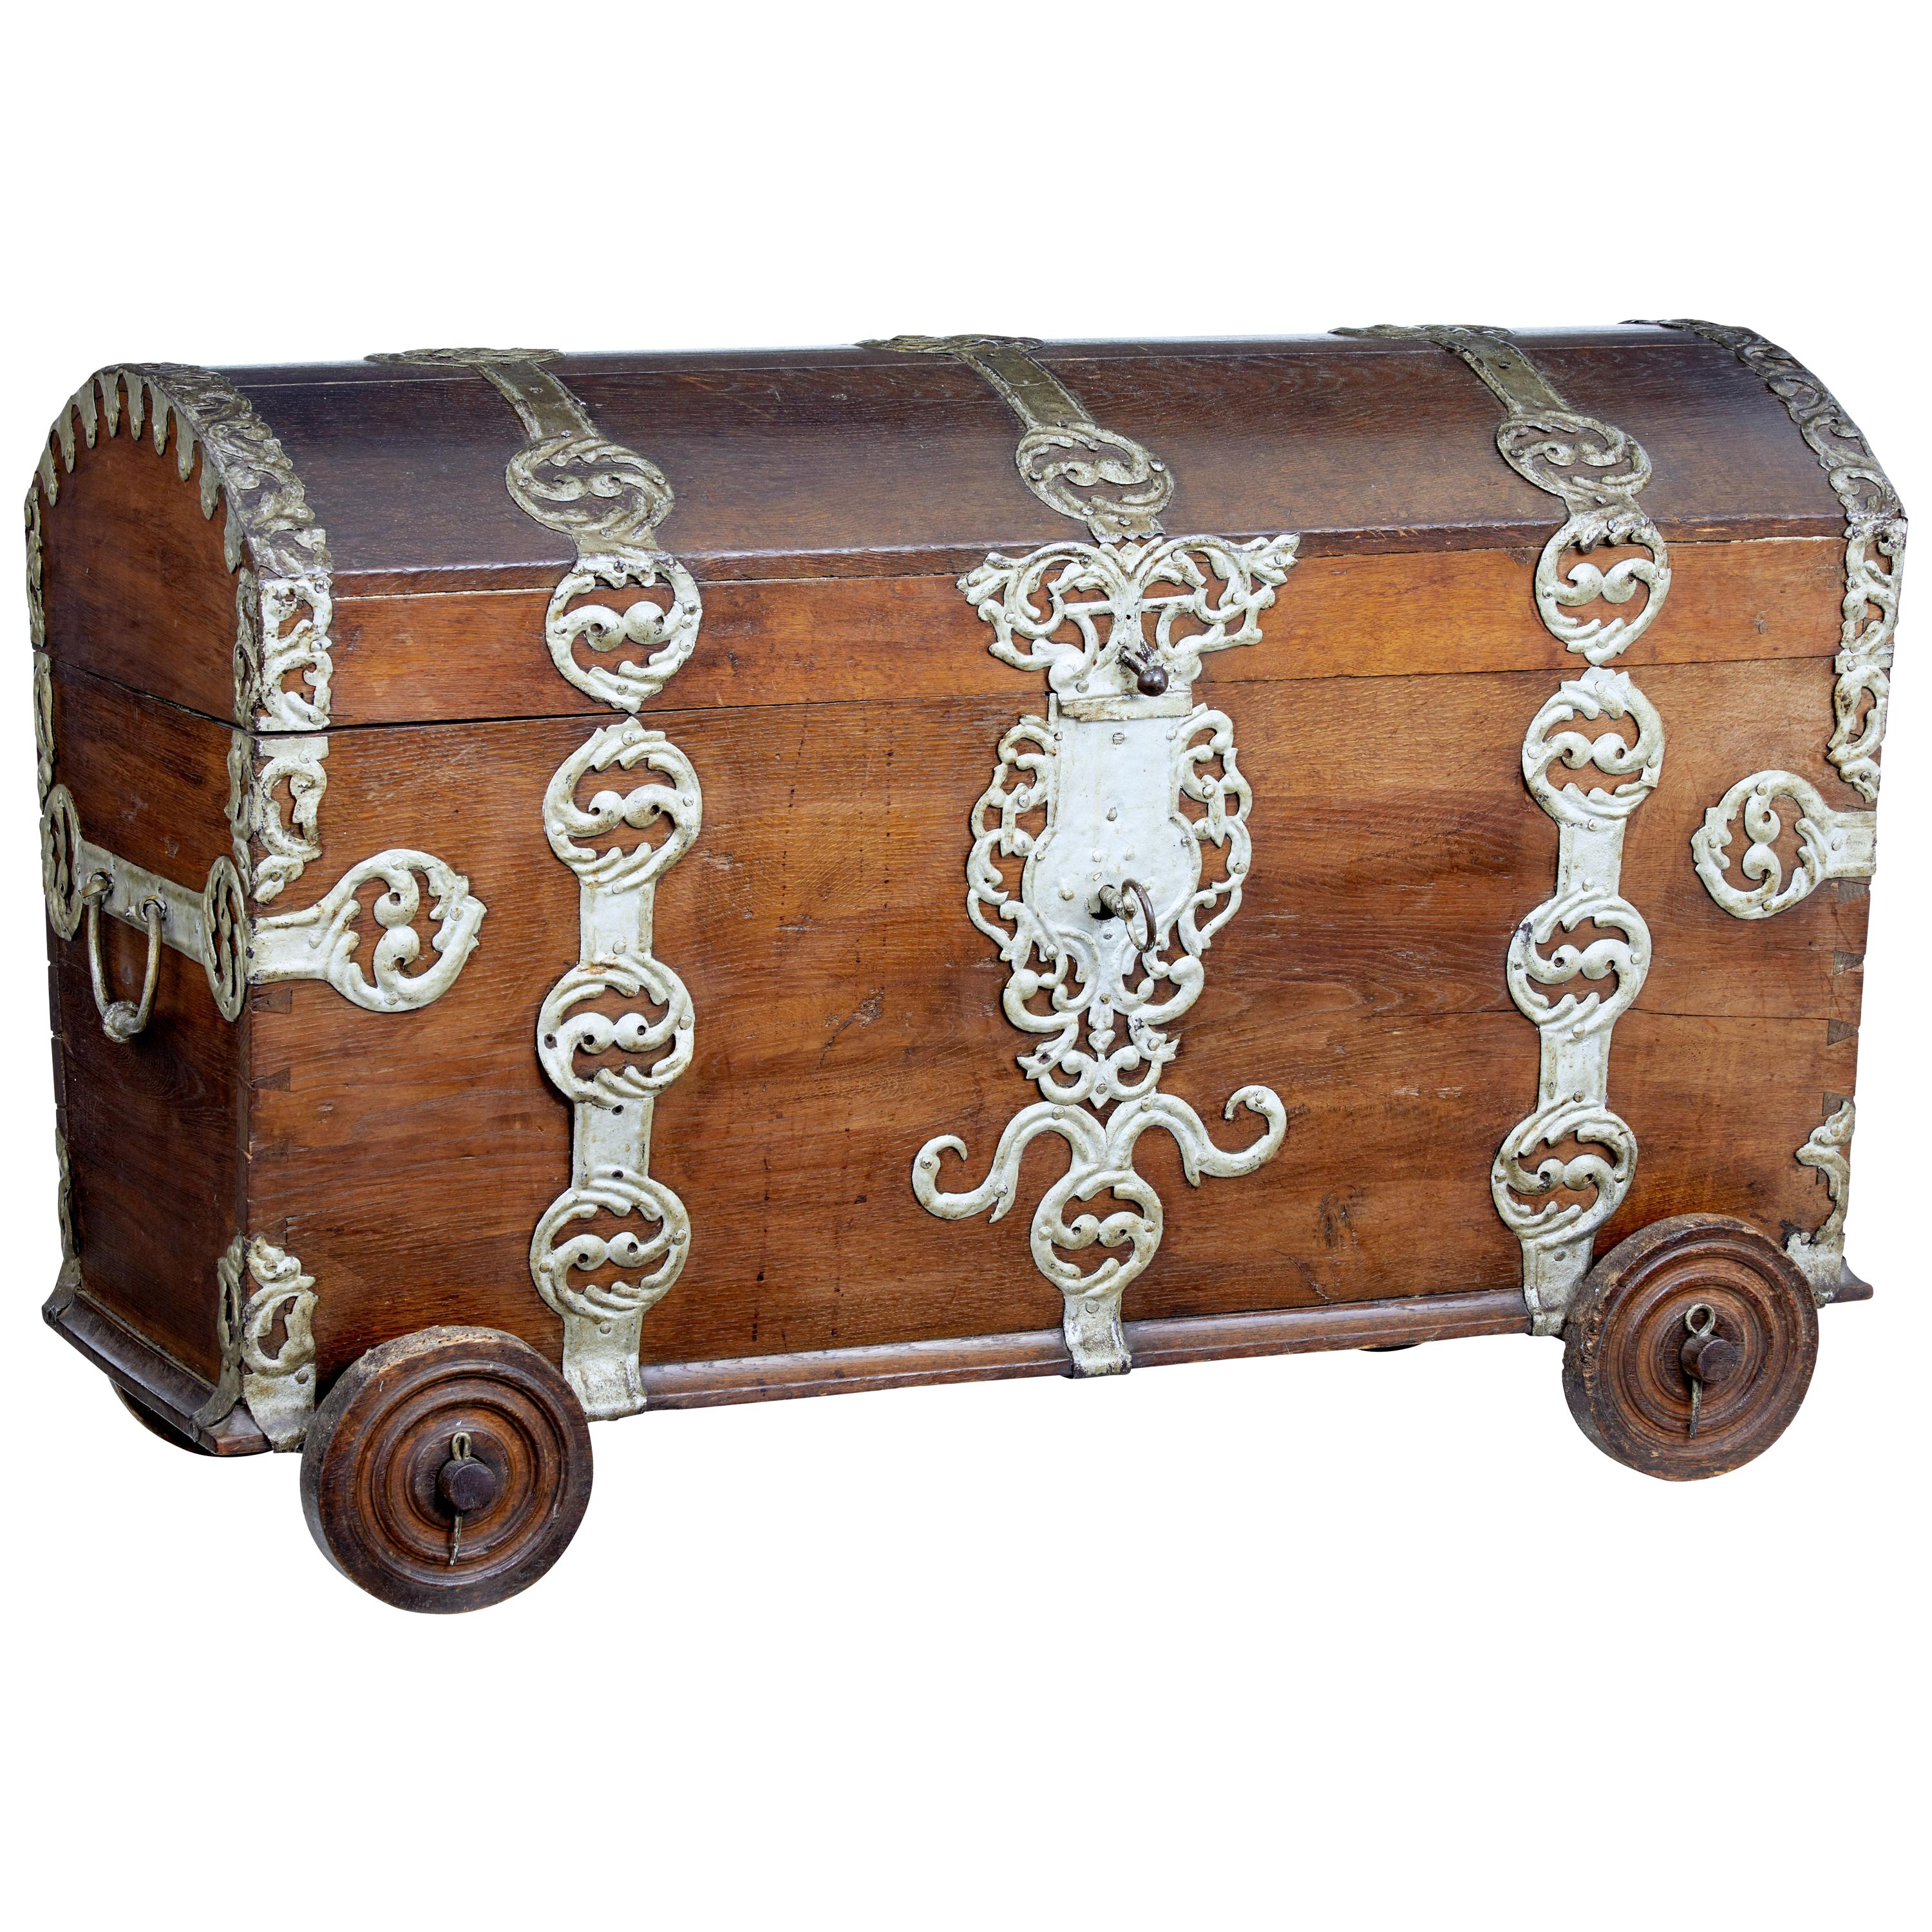 18th Century Oak and Metal Bound Trunk on Wheels